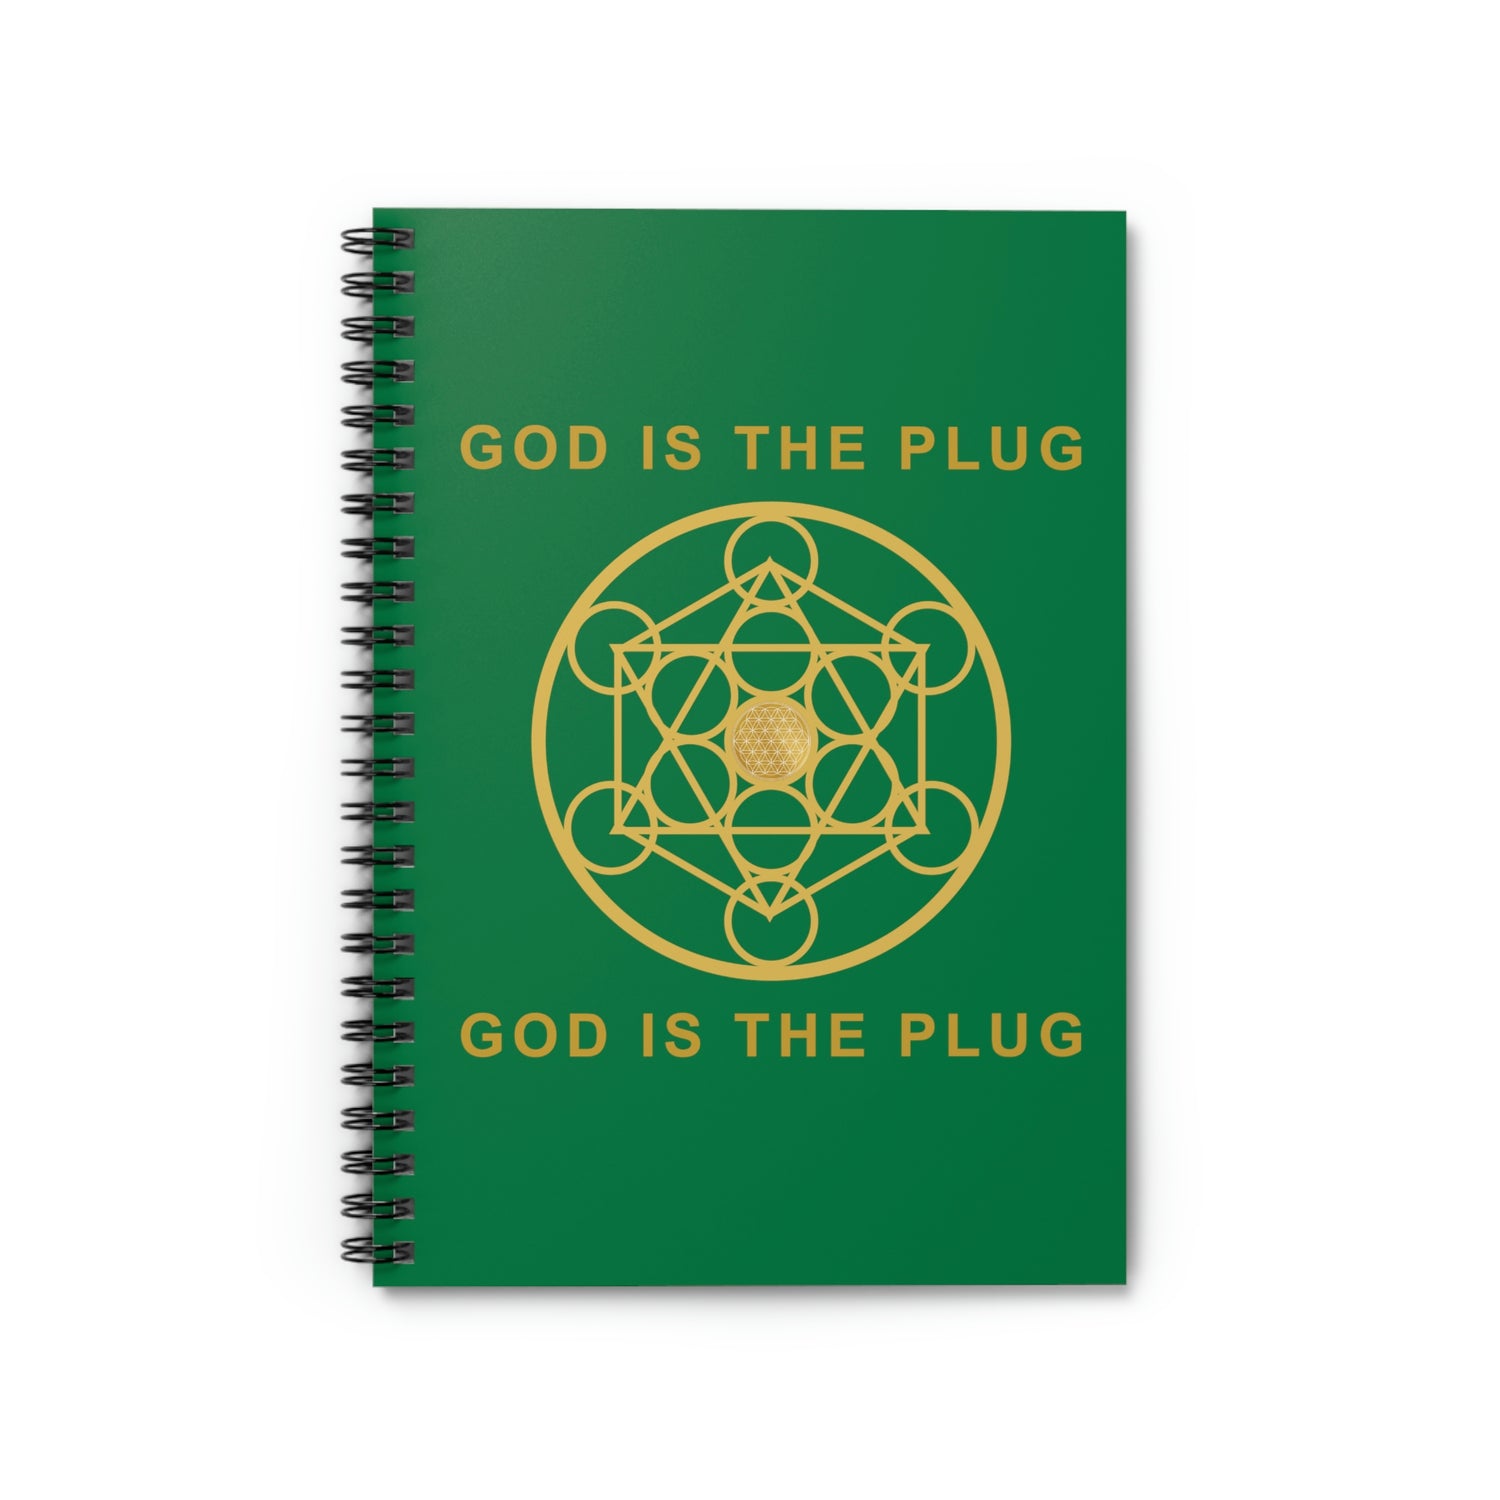 GOD IS THE PLUG - Spiral Notebook - Ruled Line - Green